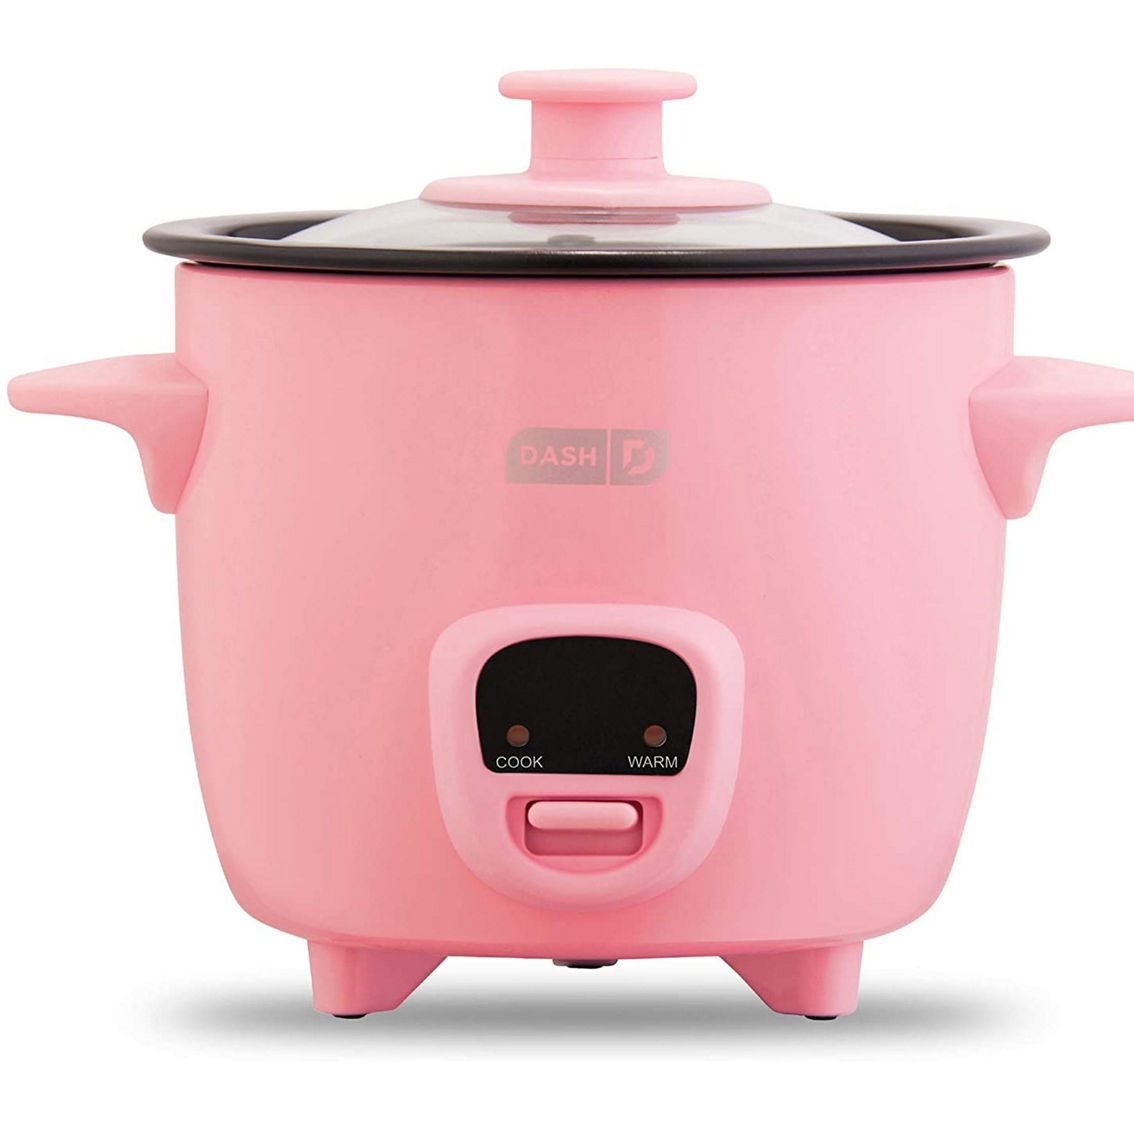 Dash Mini 16 Ounce Rice Cooker in Pink with Keep Warm Setting - Image 2 of 4